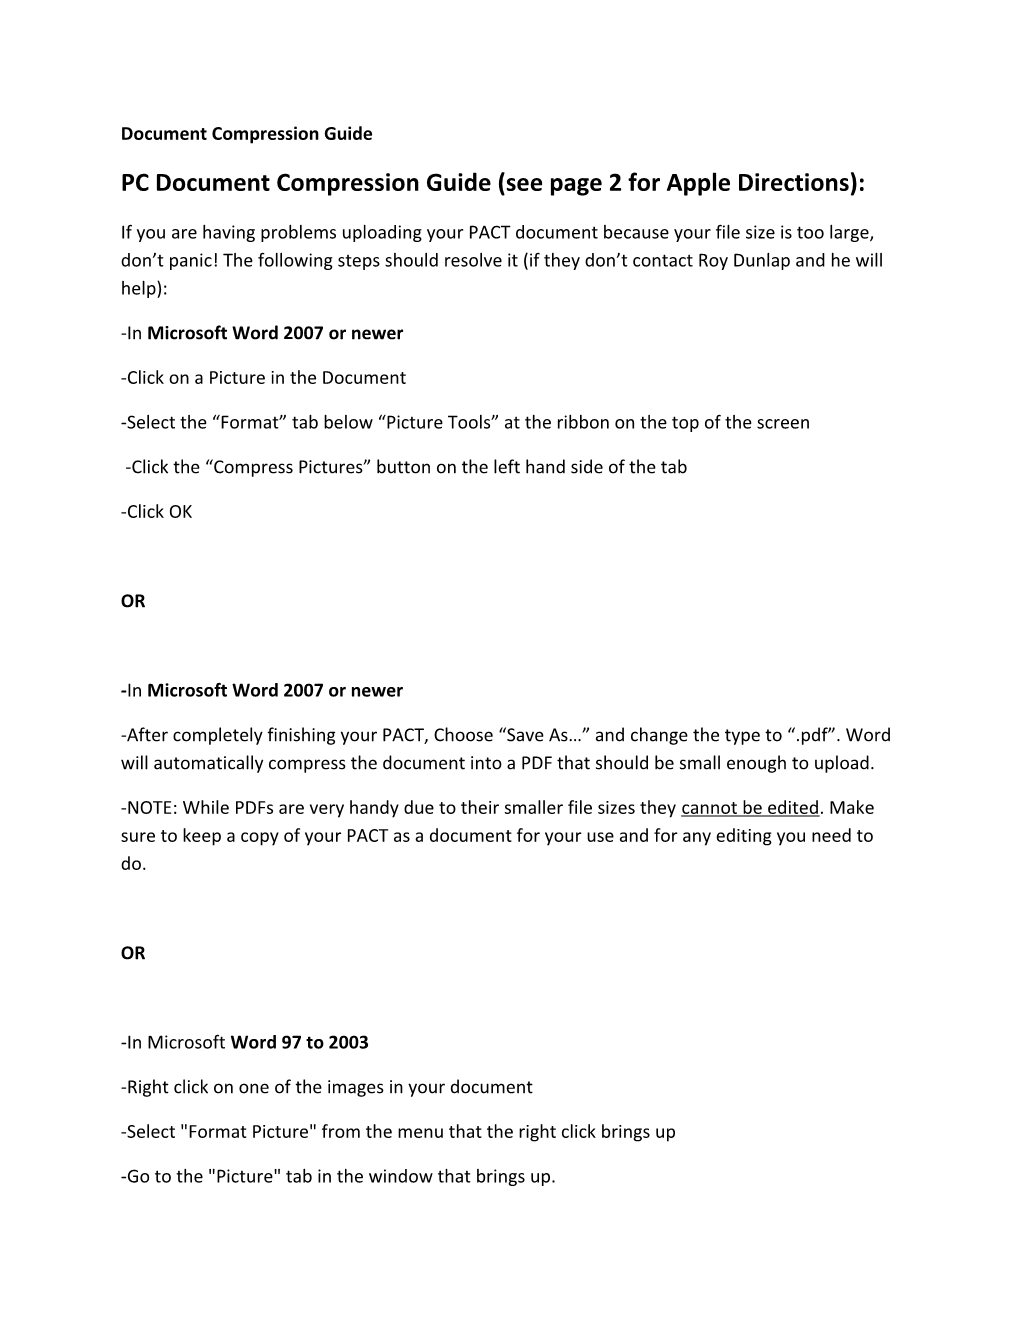 PC Document Compression Guide (See Page 2 for Apple Directions)